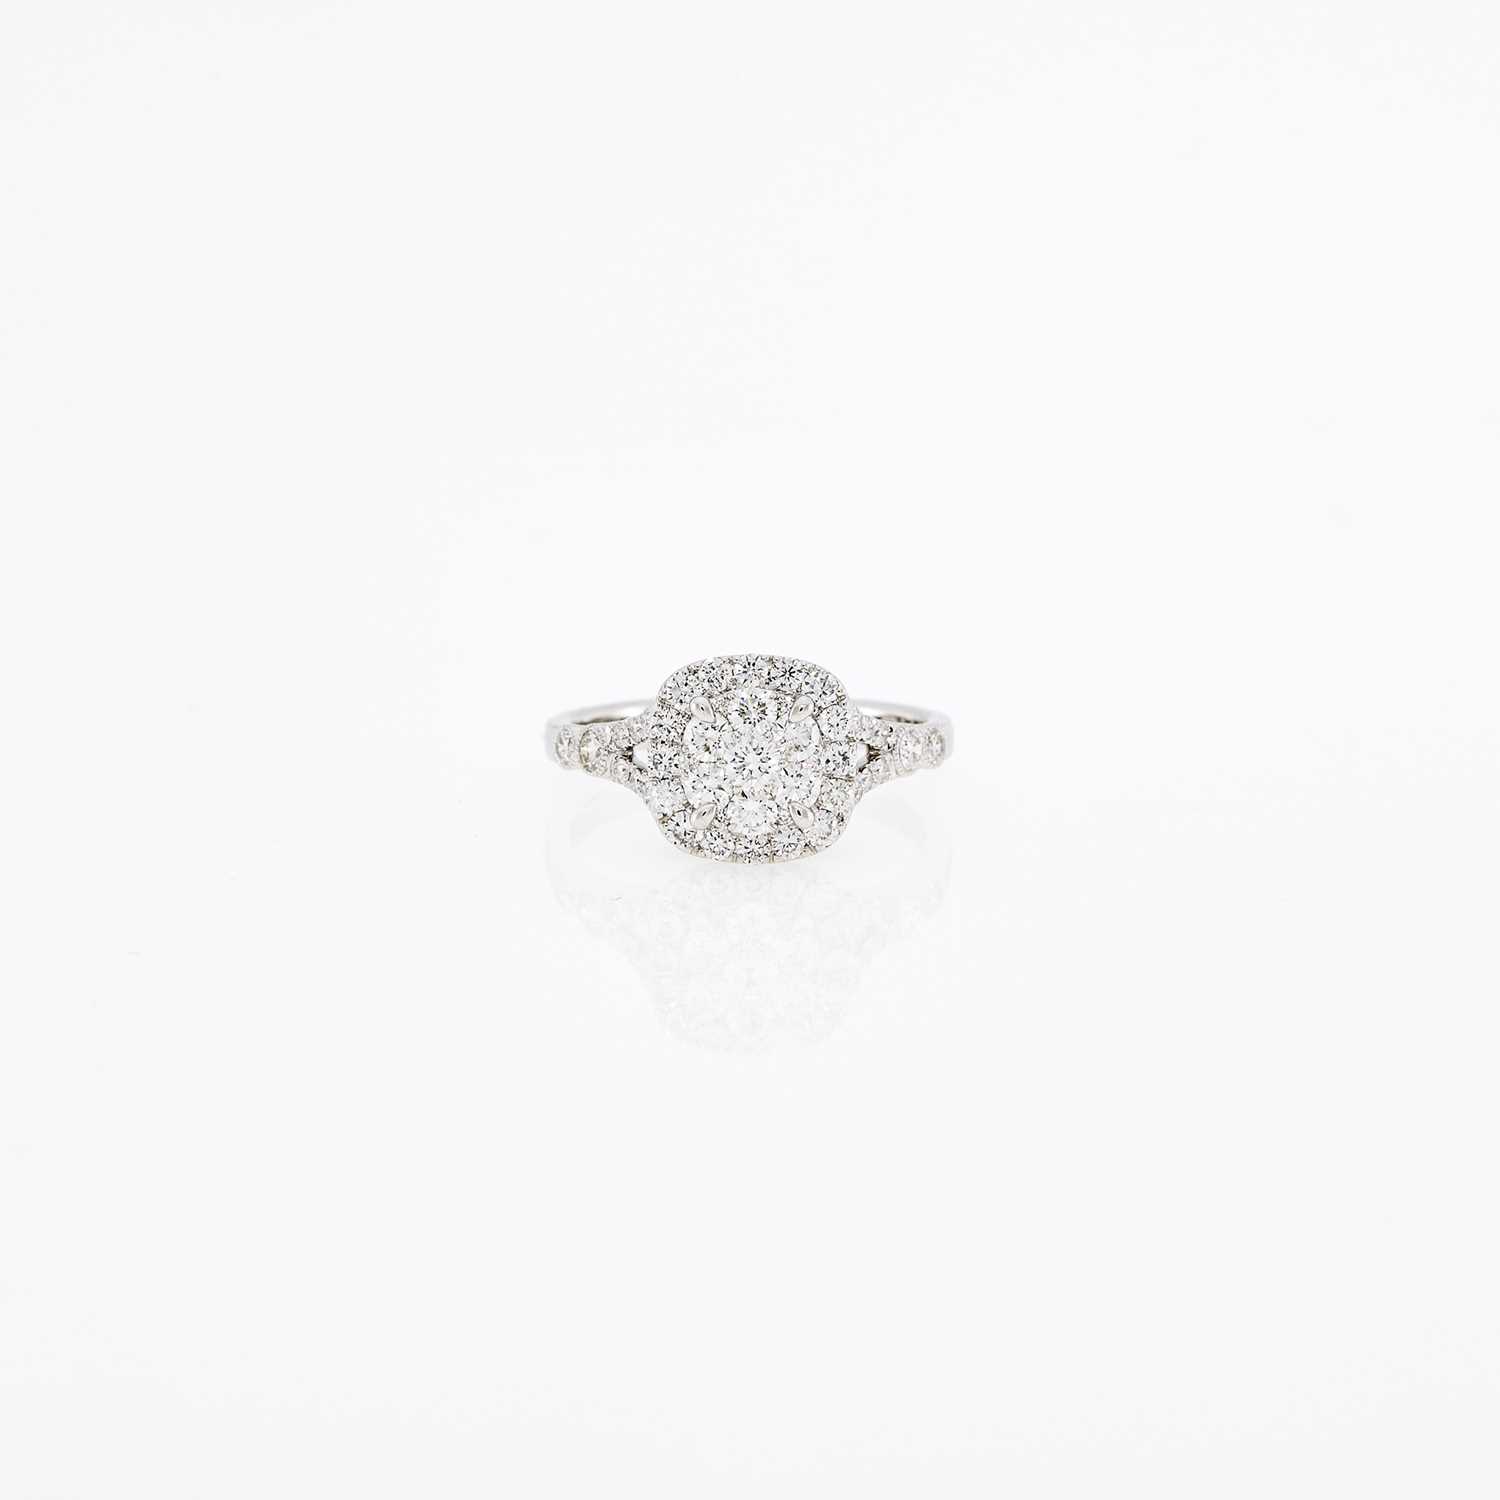 Lot 1056 - White Gold and Diamond Ring